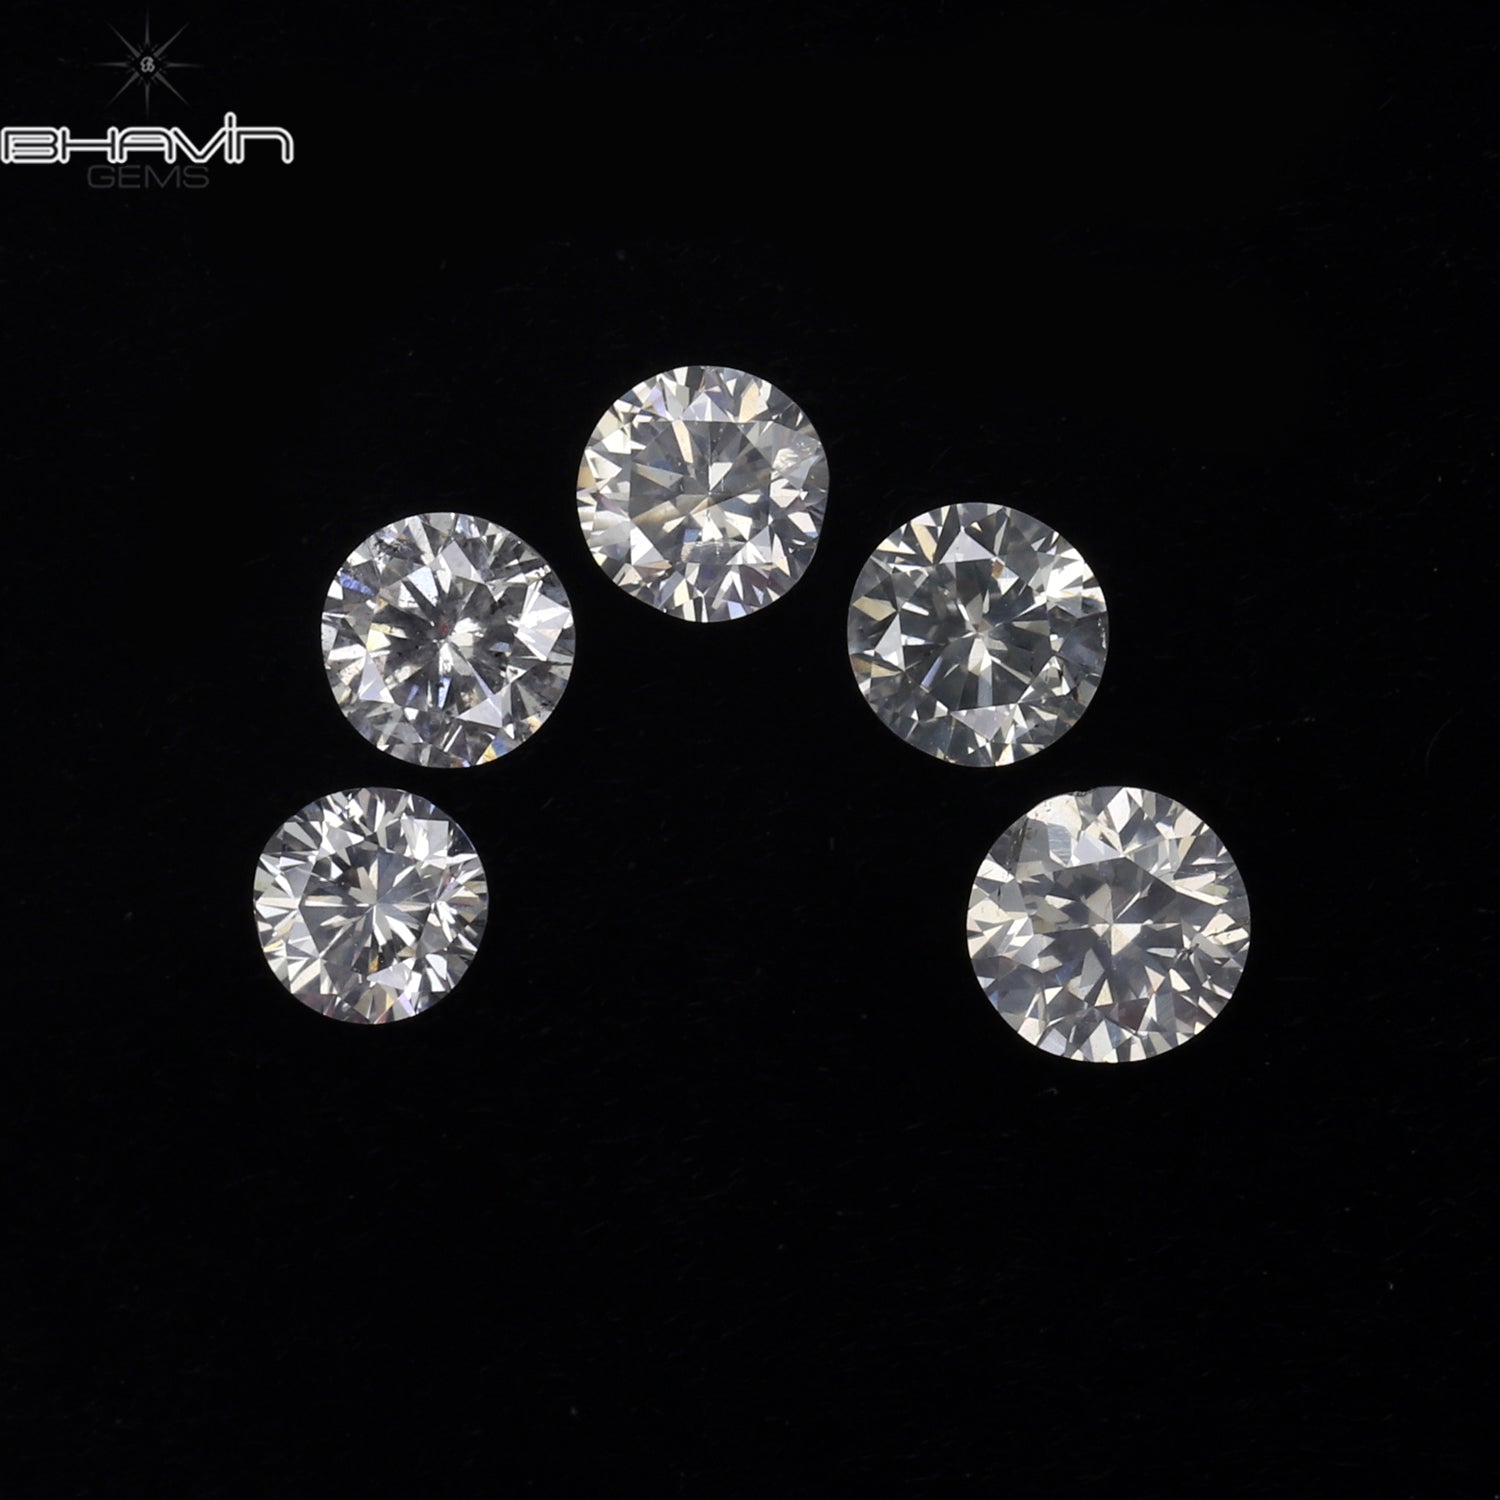 0.45 CT/5 Pcs Round Shape Natural Loose Diamond White Color SI1 Clarity (2.80 MM)